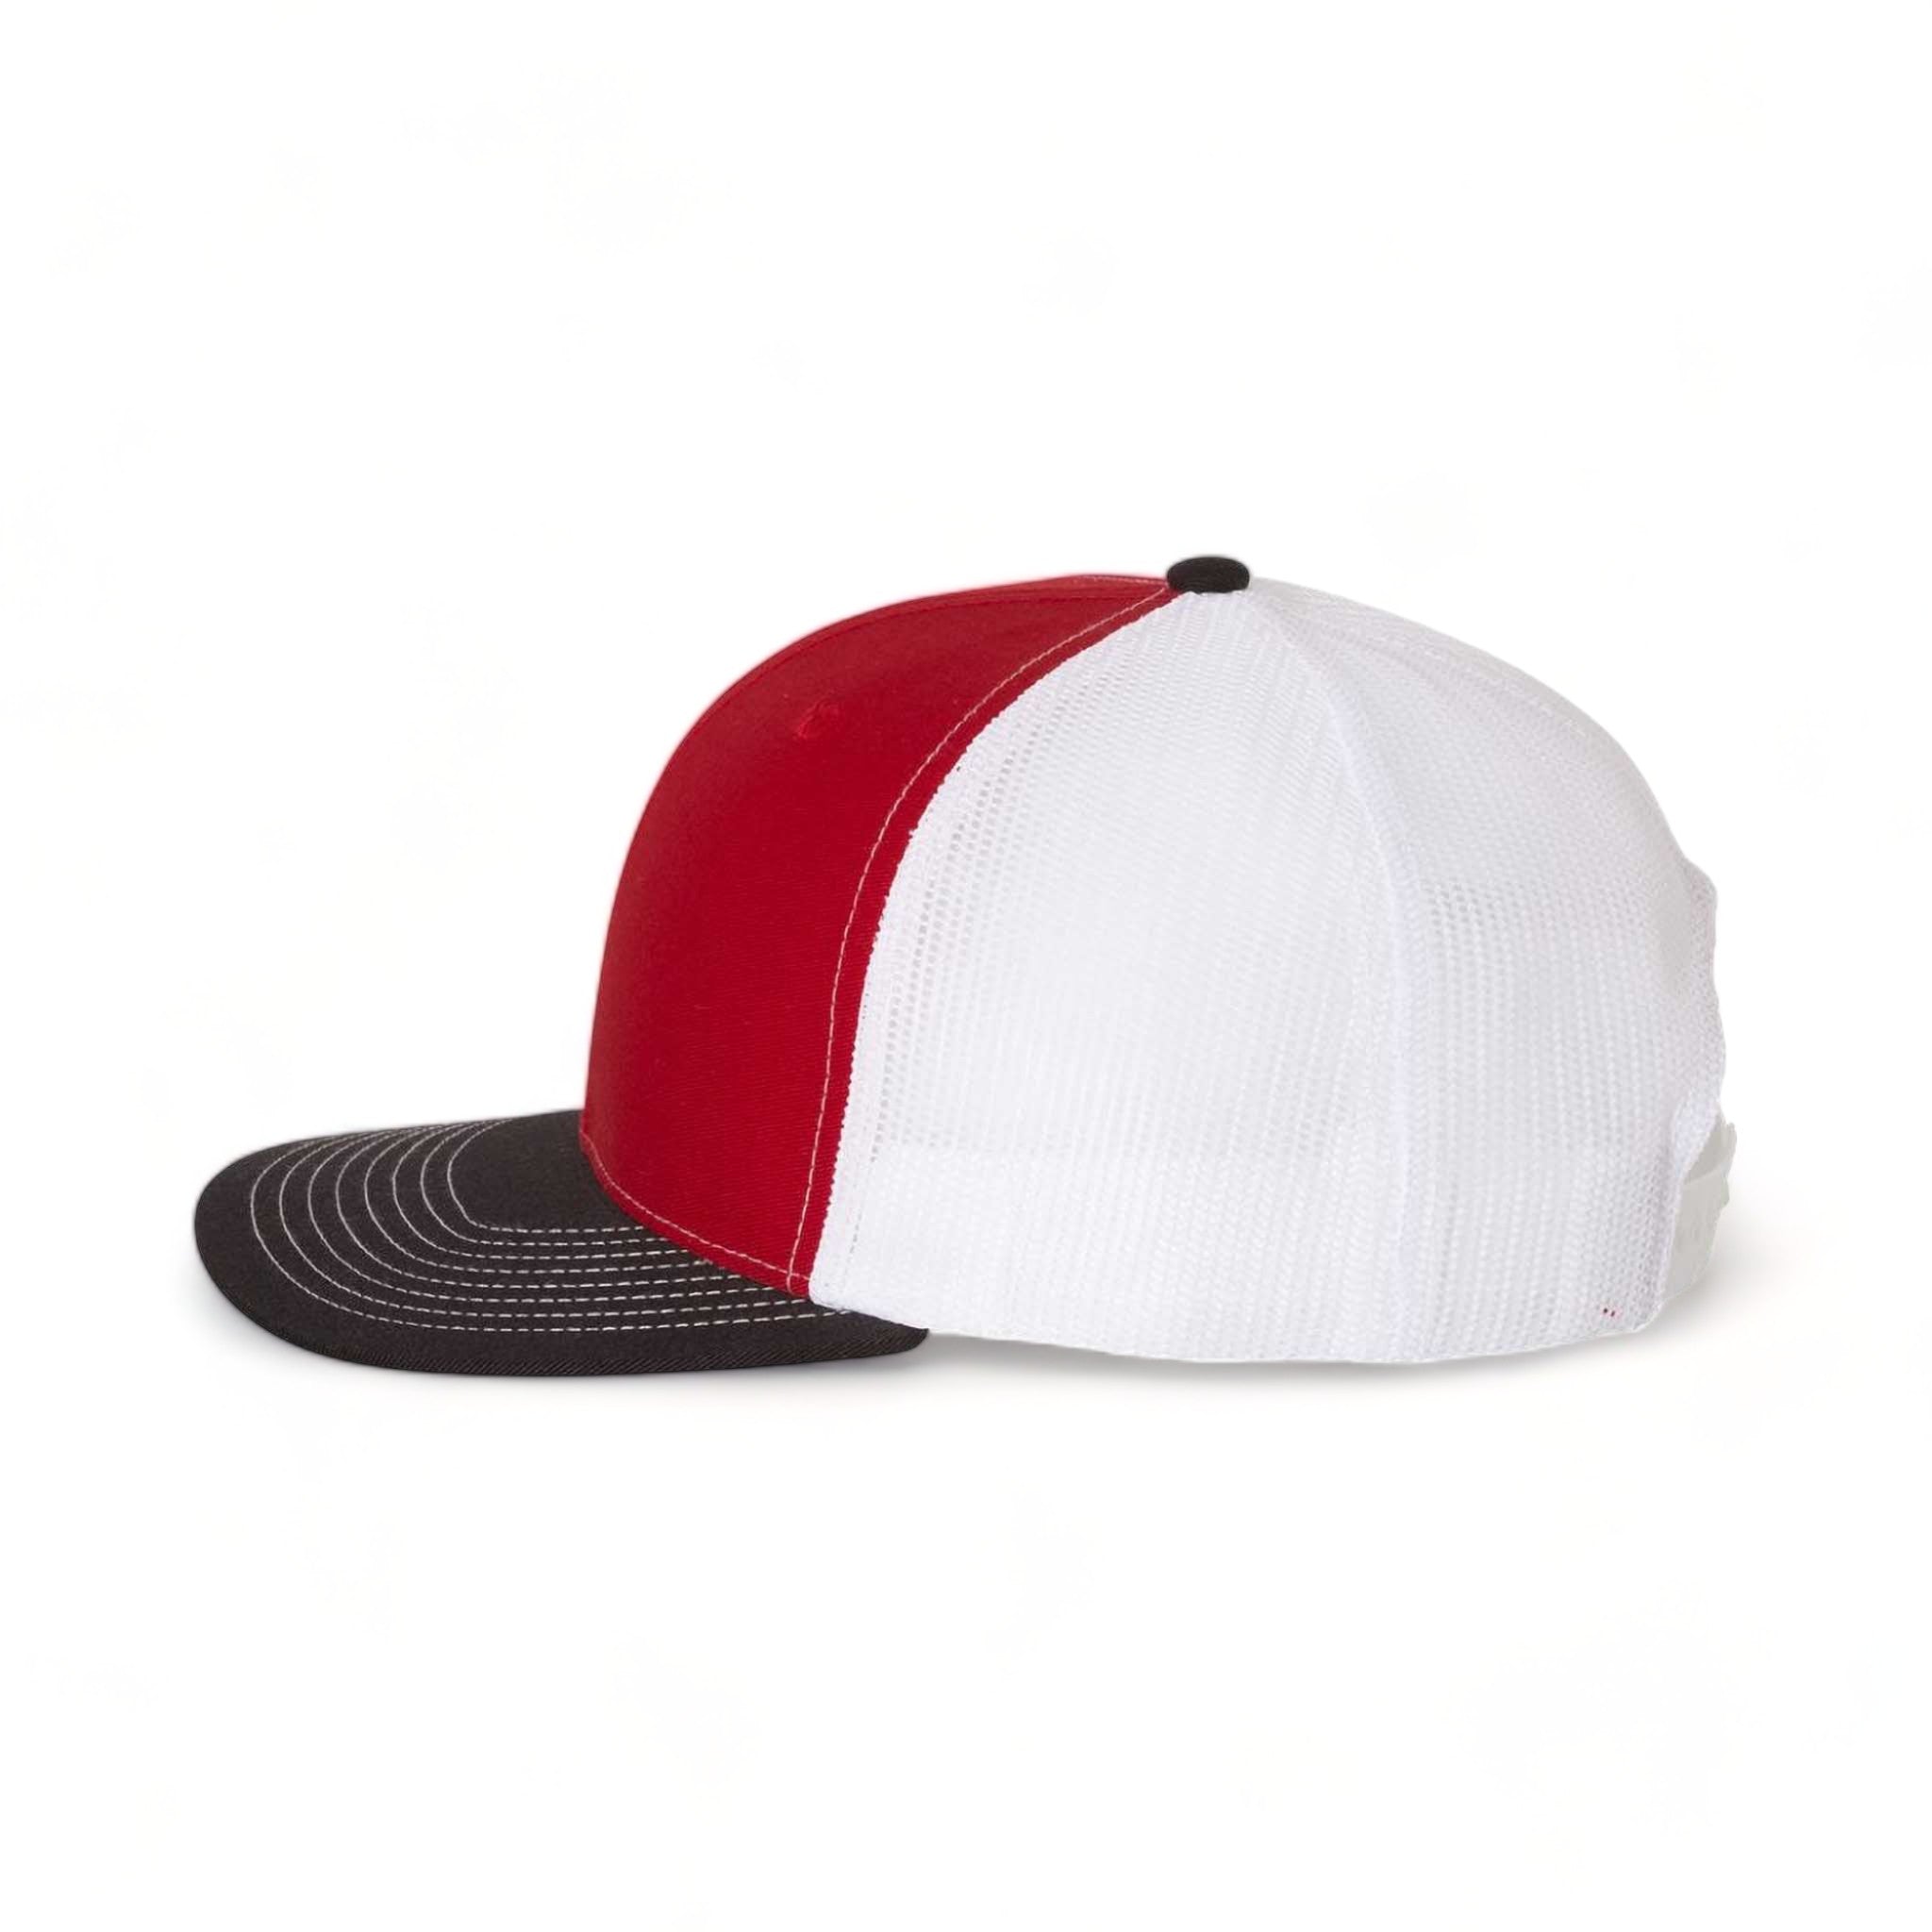 Side view of Richardson 112 custom hat in red, white and black